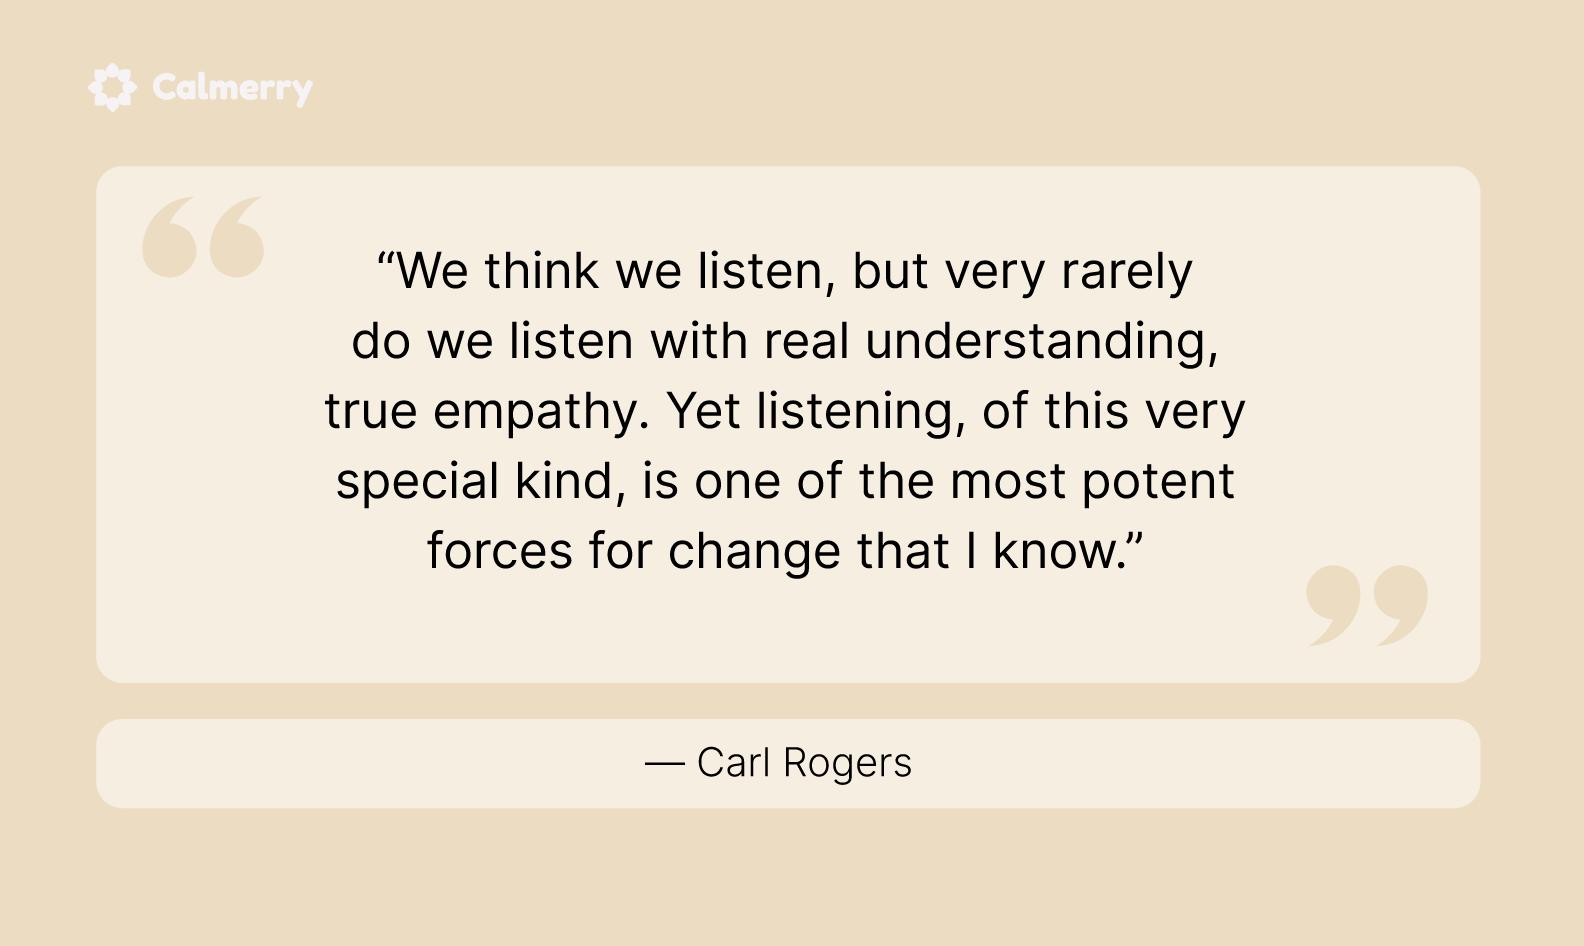 Carl Rogers quote on empathy